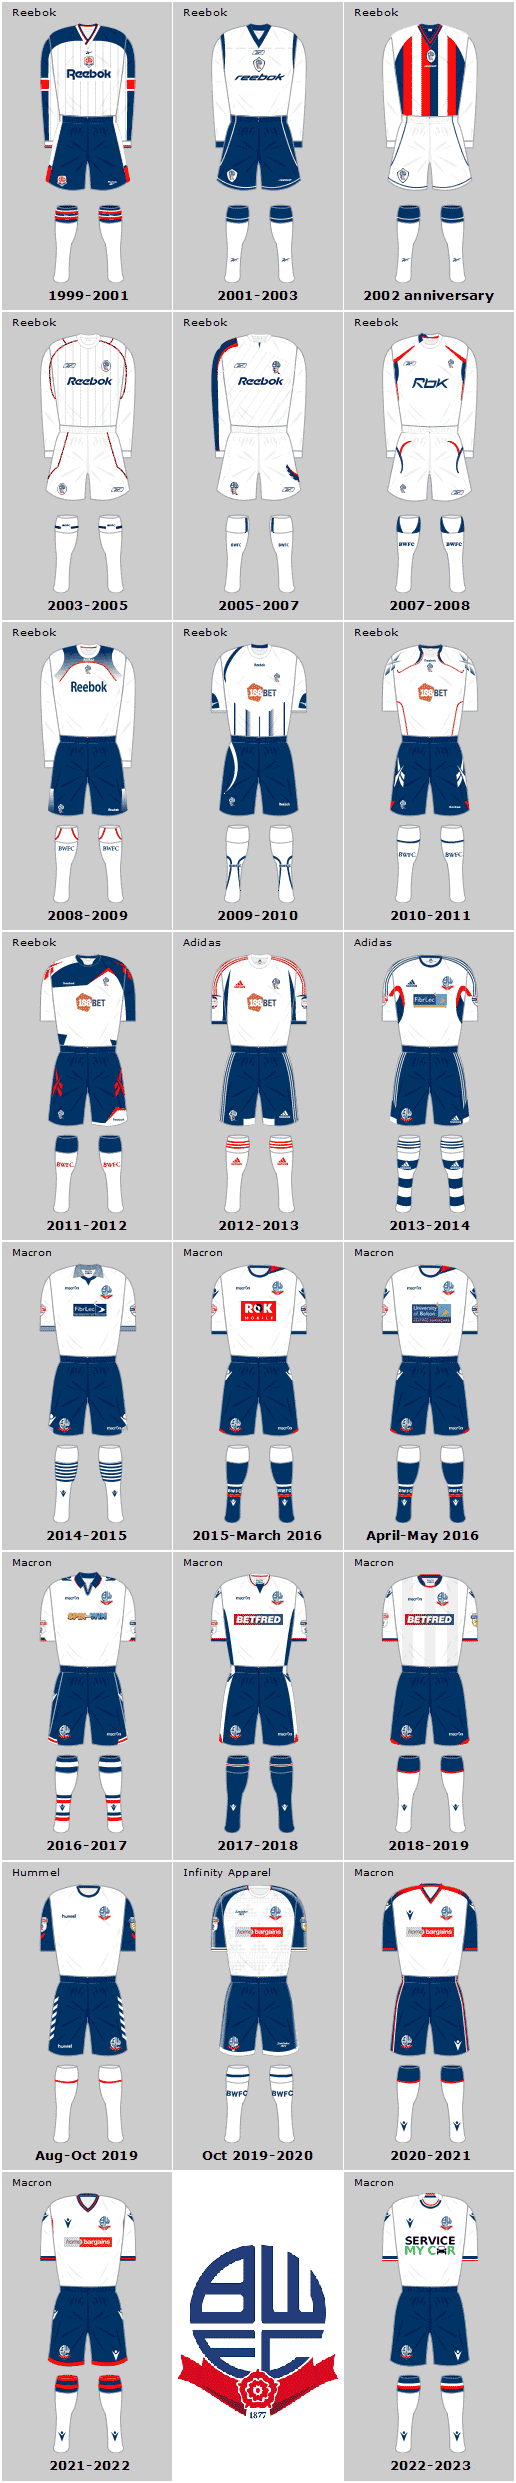 Bolton Wanderers 21st Century Home Playing Kits